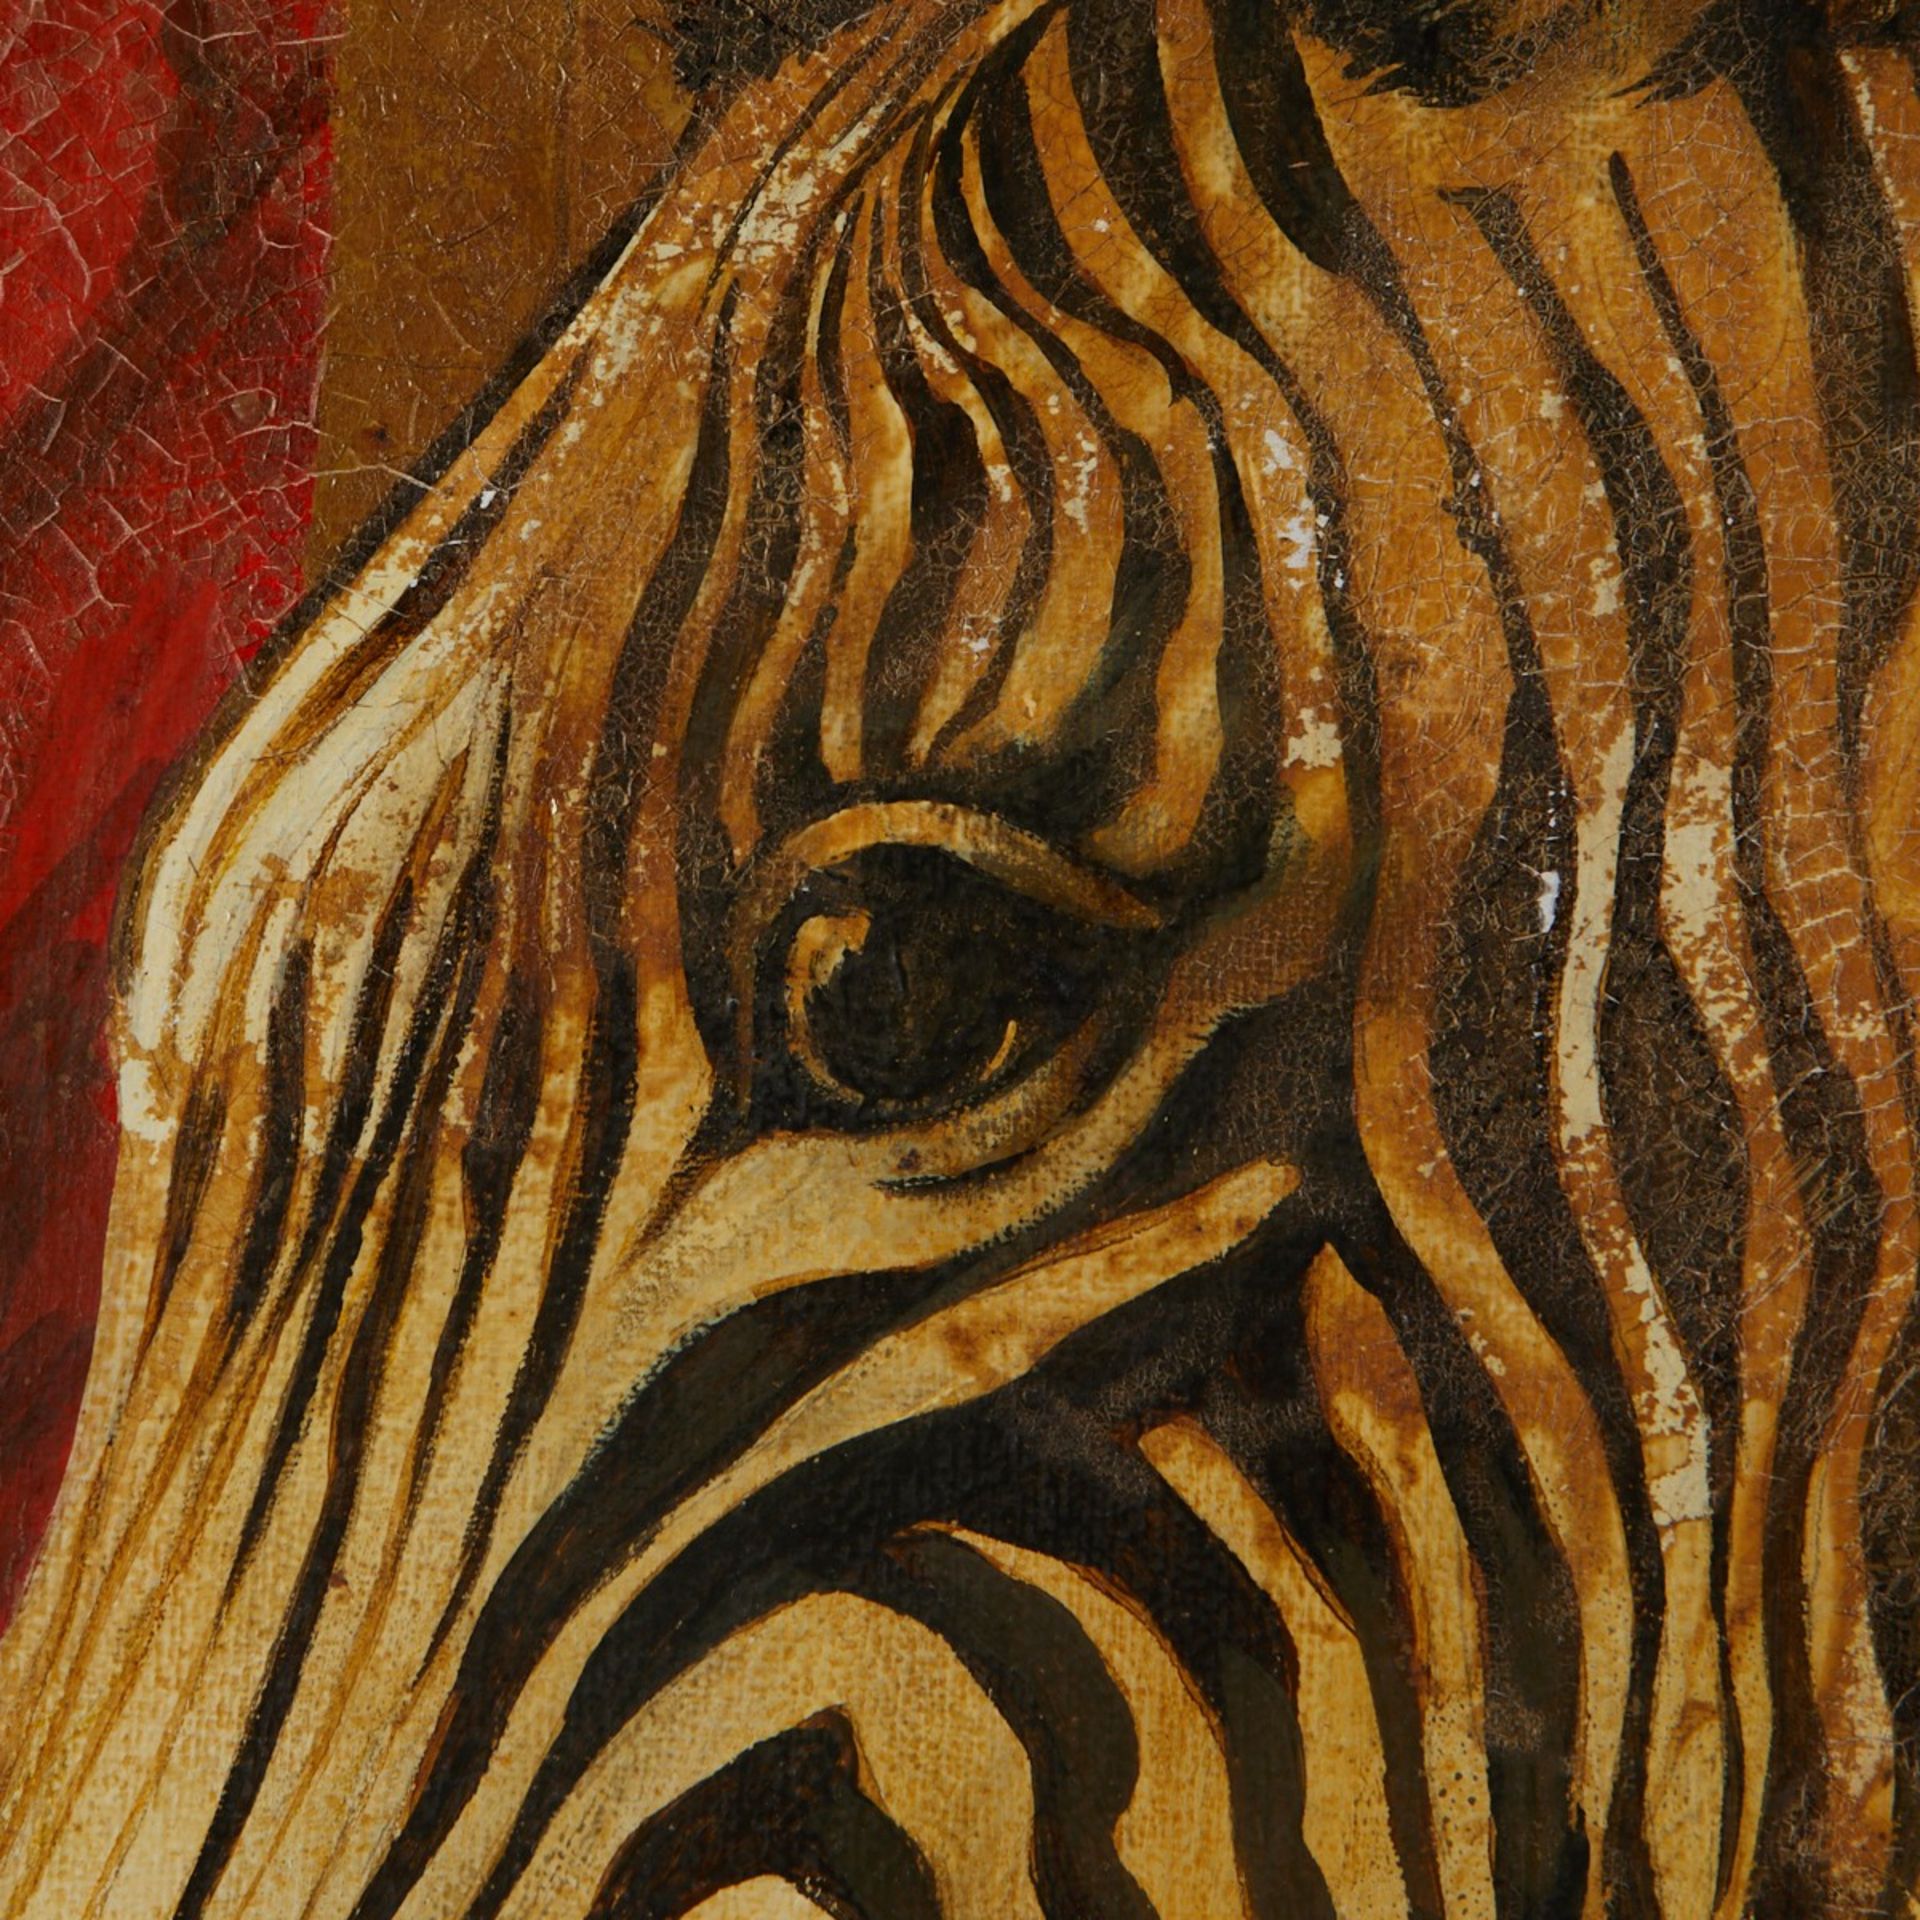 William Skilling Zebra Oil on Canvas Painting - Image 2 of 16